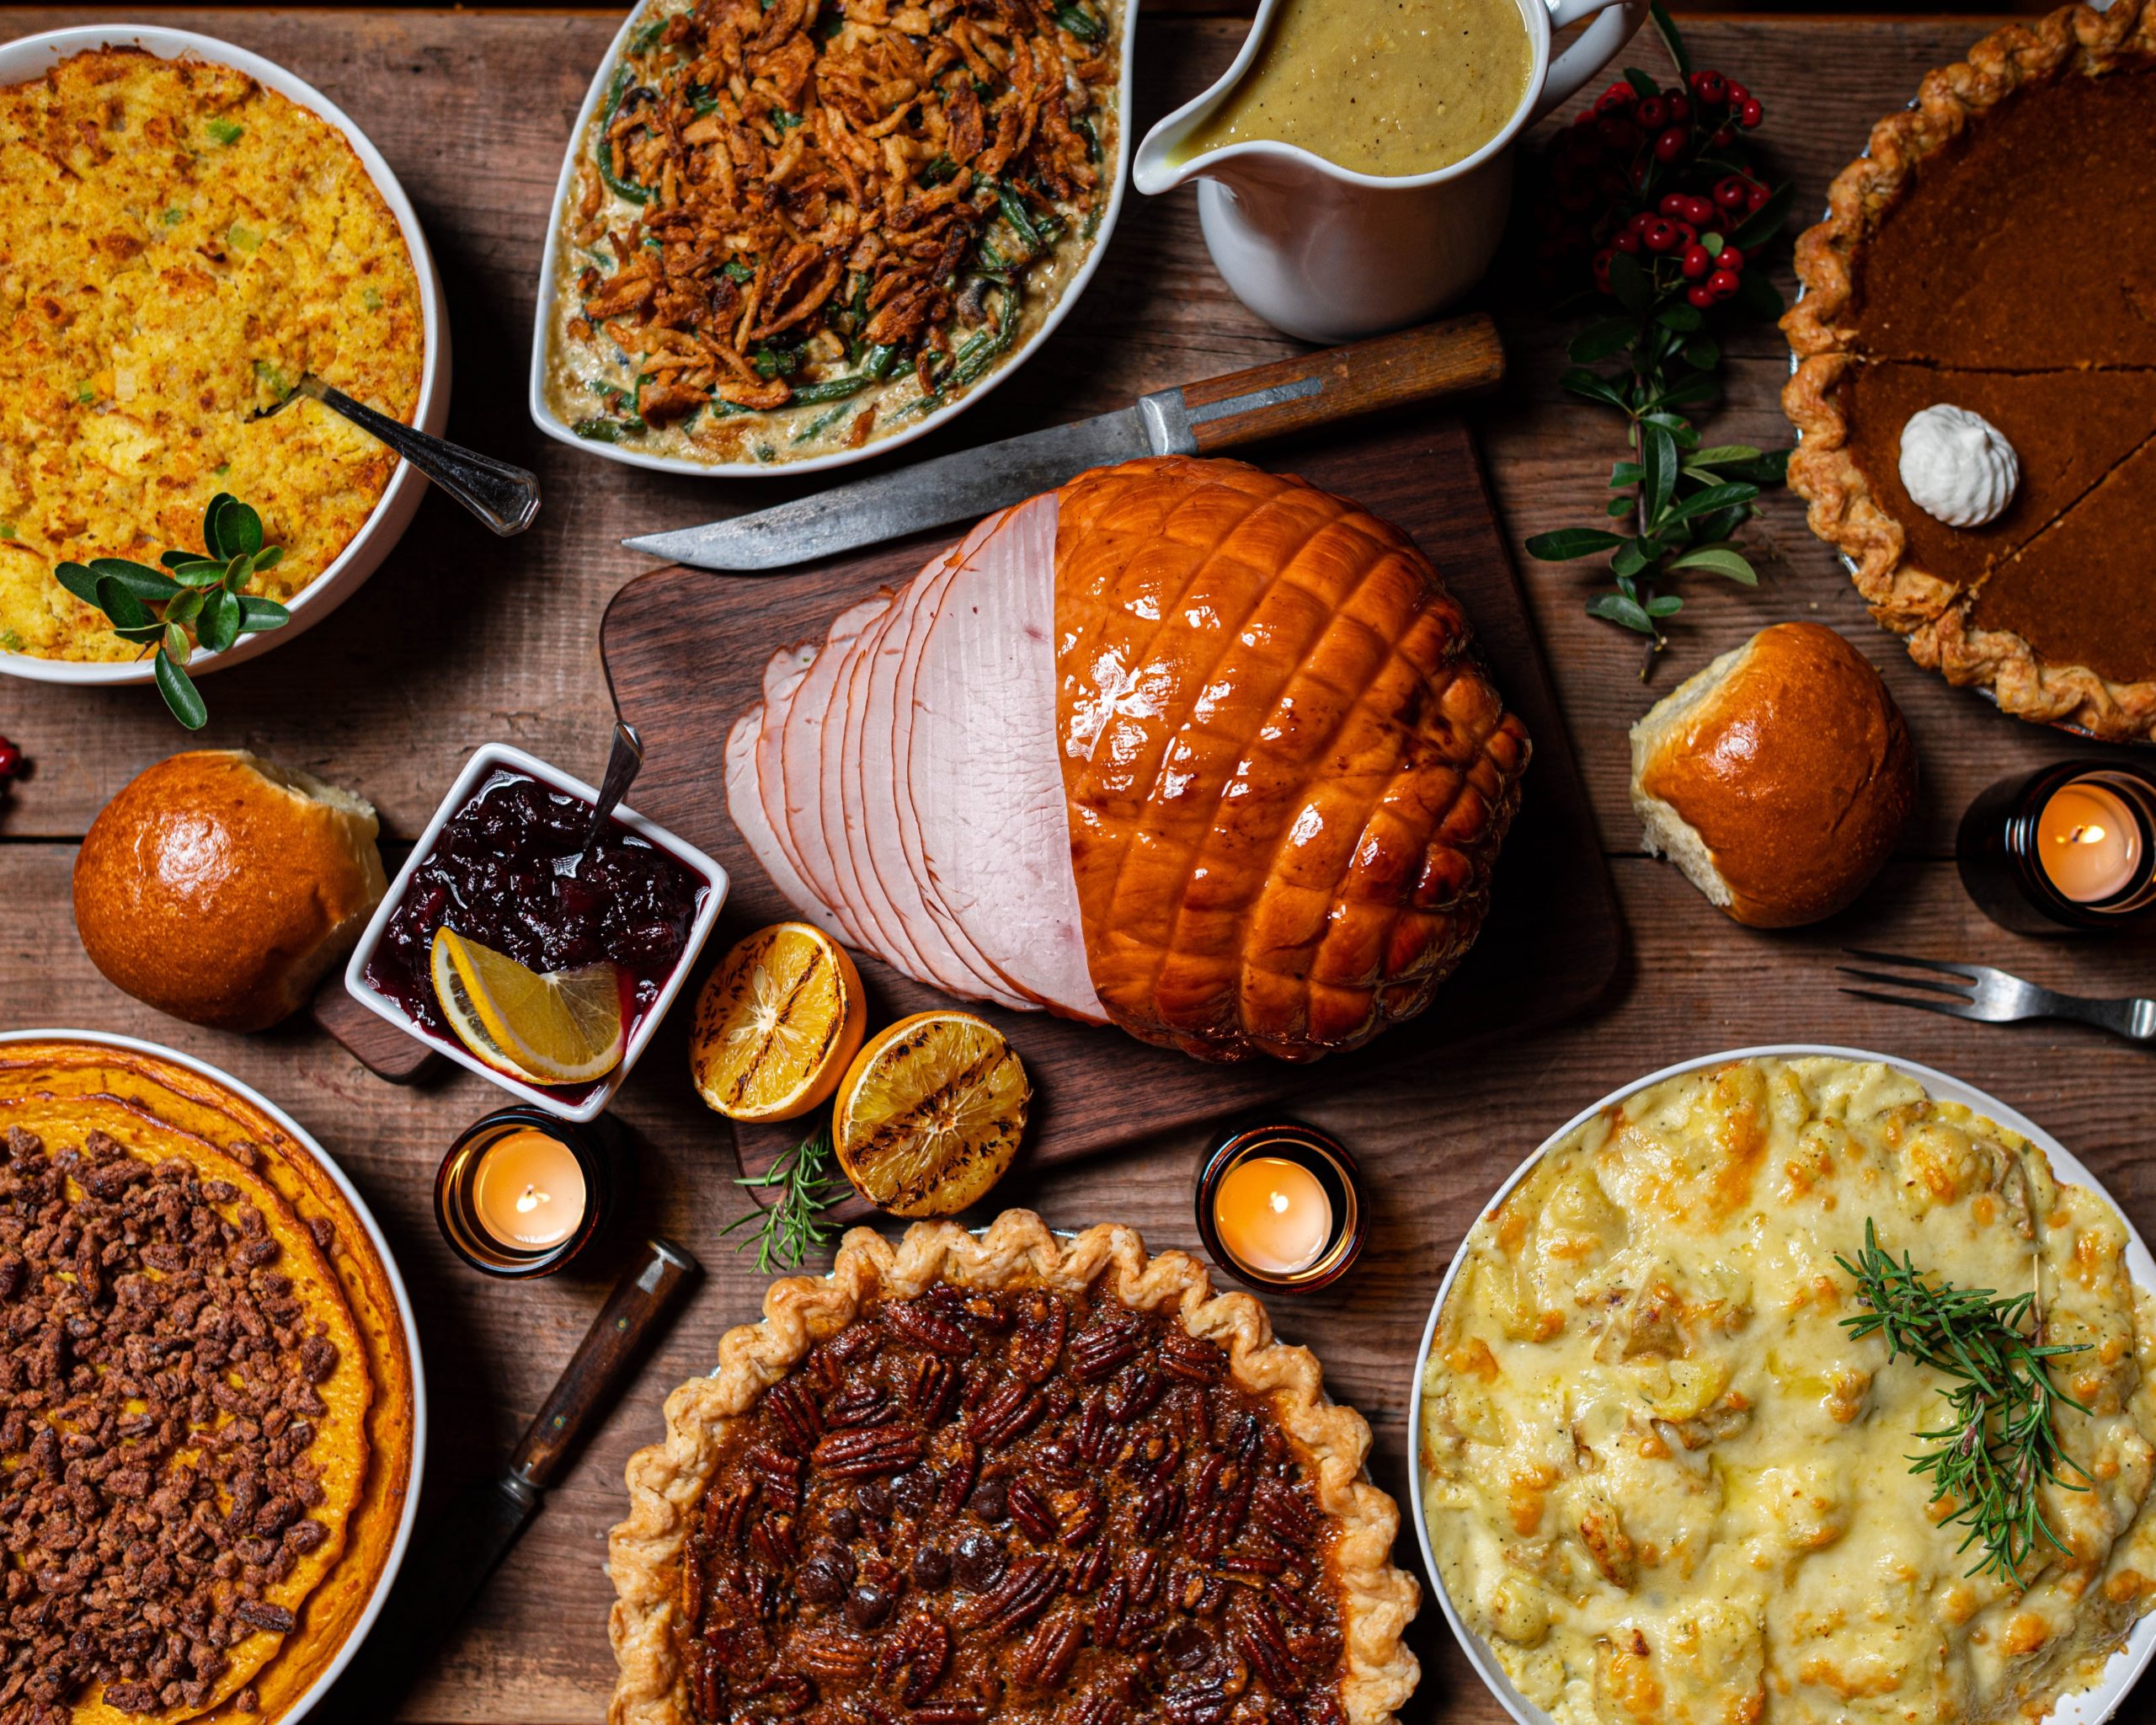 Turkey, pie, recycling: Simple steps for less wasteful holidays